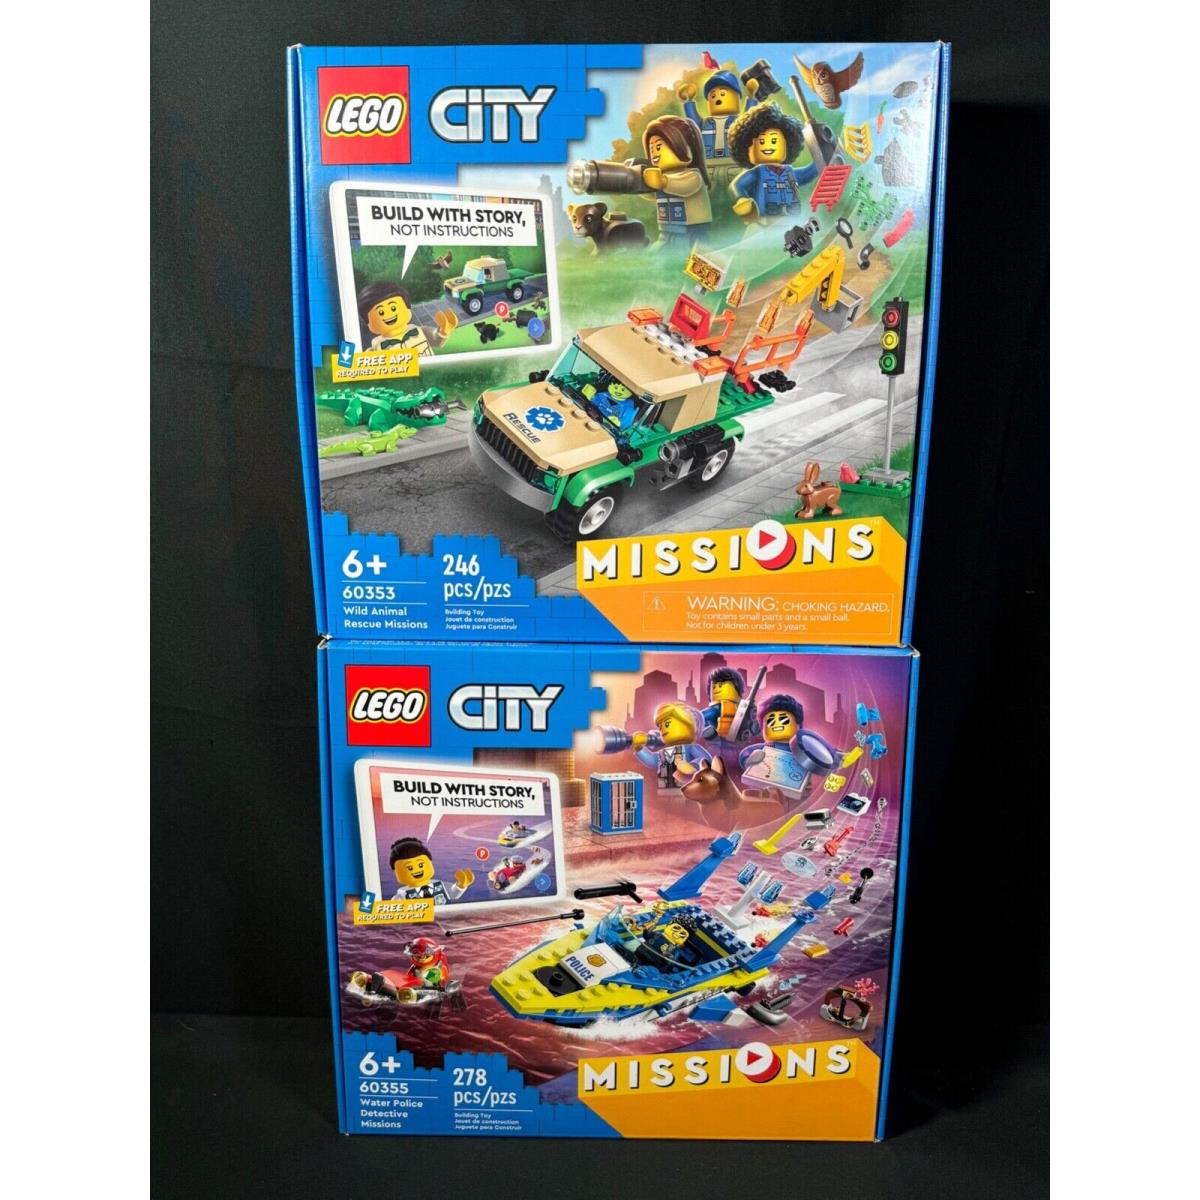 2 Lego Missions Sets - 60353 60355 Water Police Detective Wild Animal Rescue